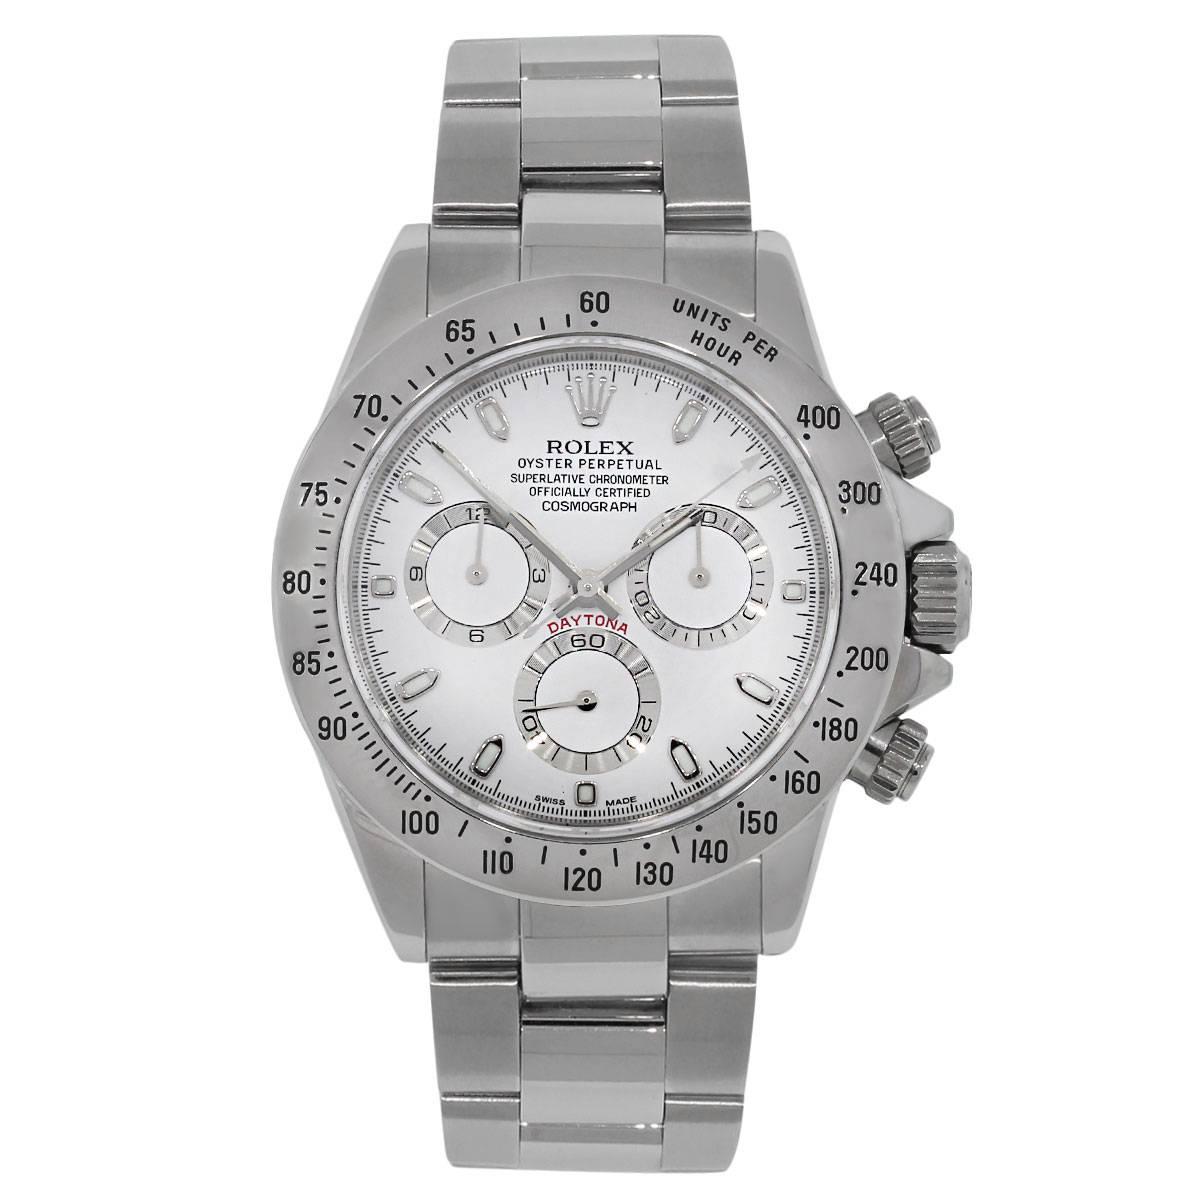 Brand: Rolex
MPN: 116520
Model: Daytona
Case Material: Stainless Steel
Case Diameter	: 40mm
Crystal: Sapphire crystal
Bezel: Fixed stainless steel with engraved Tachymeter
Dial: White Chronograph Dial with 3 sub dials, silver luminescent